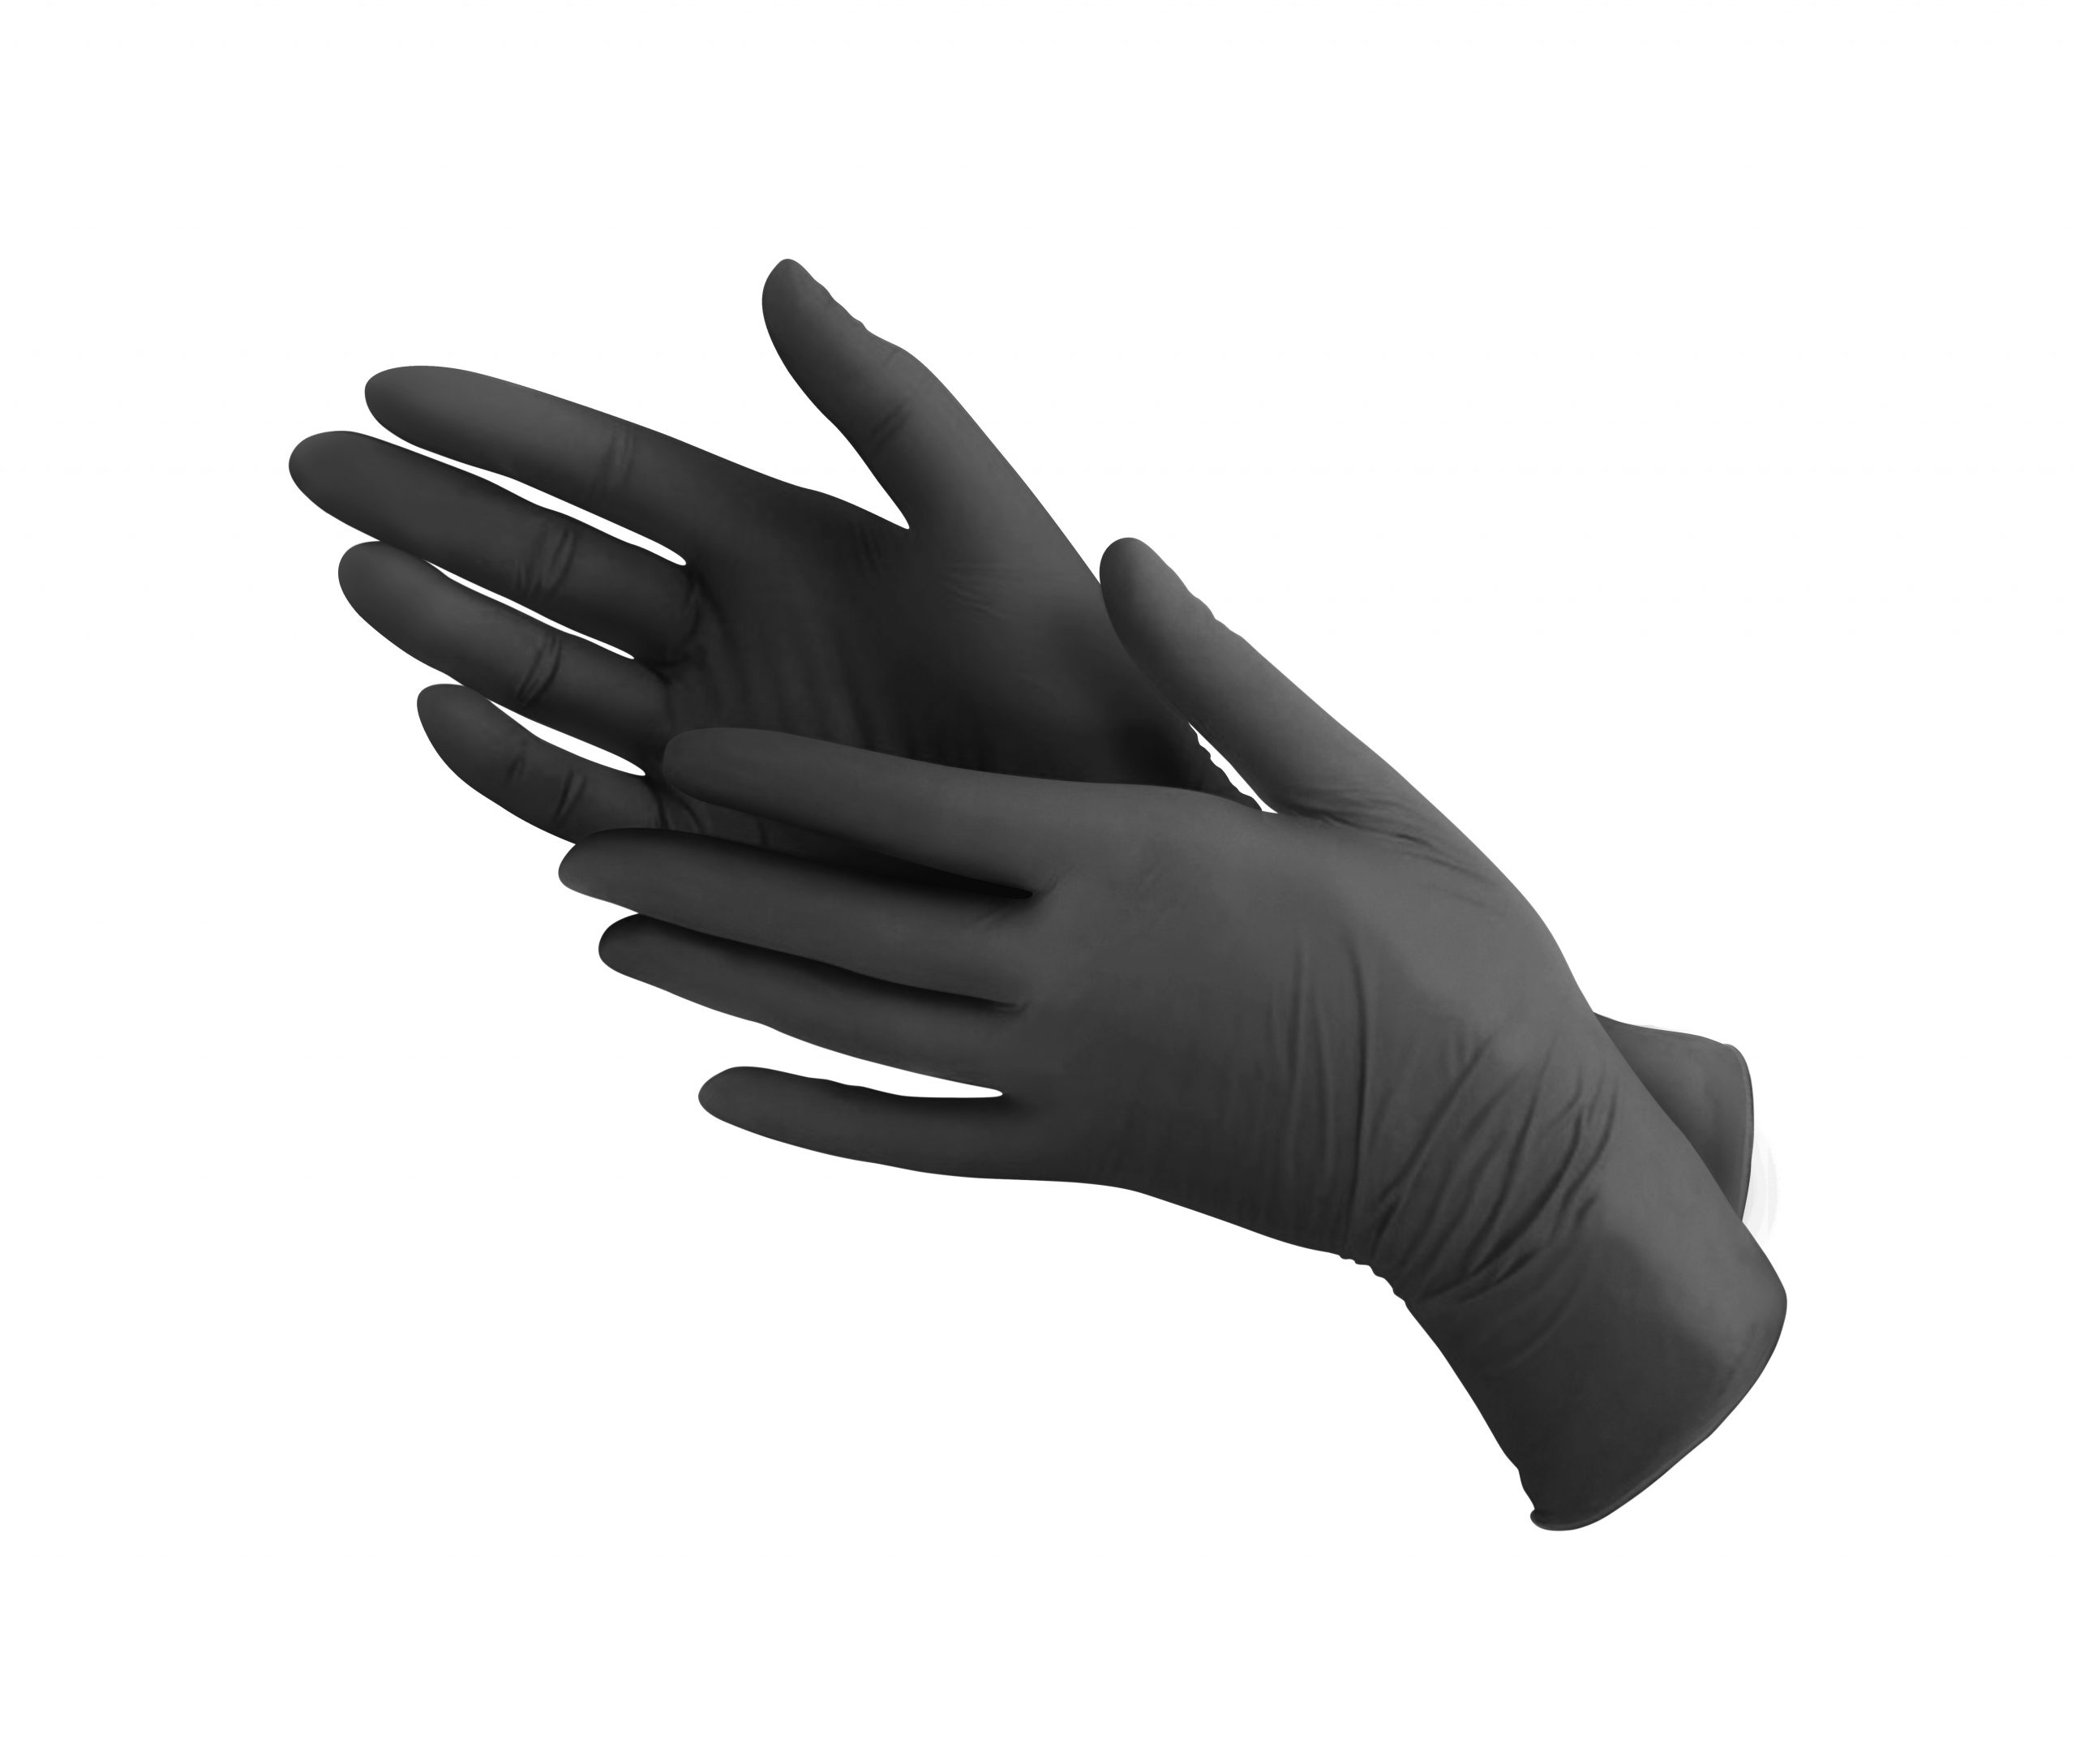 Medical,Nitrile,Gloves.two,Black,Surgical,Gloves,Isolated,On,White,Background